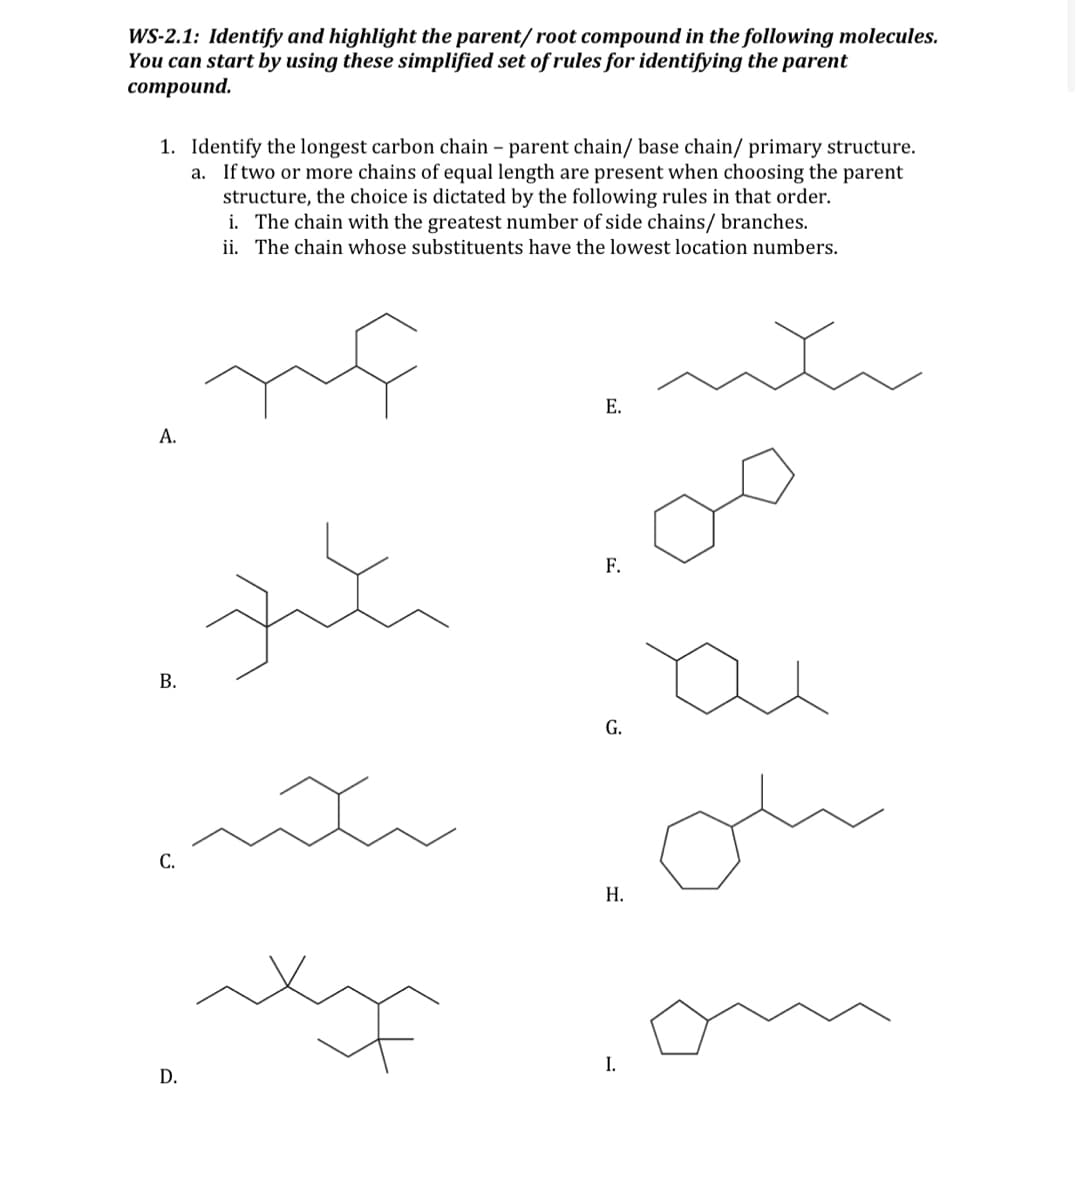 WS-2.1: Identify and highlight the parent/root compound in the following molecules.
You can start by using these simplified set of rules for identifying the parent
compound.
1. Identify the longest carbon chain - parent chain/ base chain/ primary structure.
a. If two or more chains of equal length are present when choosing the parent
structure, the choice is dictated by the following rules in that order.
i. The chain with the greatest number of side chains/ branches.
ii. The chain whose substituents have the lowest location numbers.
ng
nh
A.
B.
C.
D.
zit
h
E.
F.
G.
H.
I.